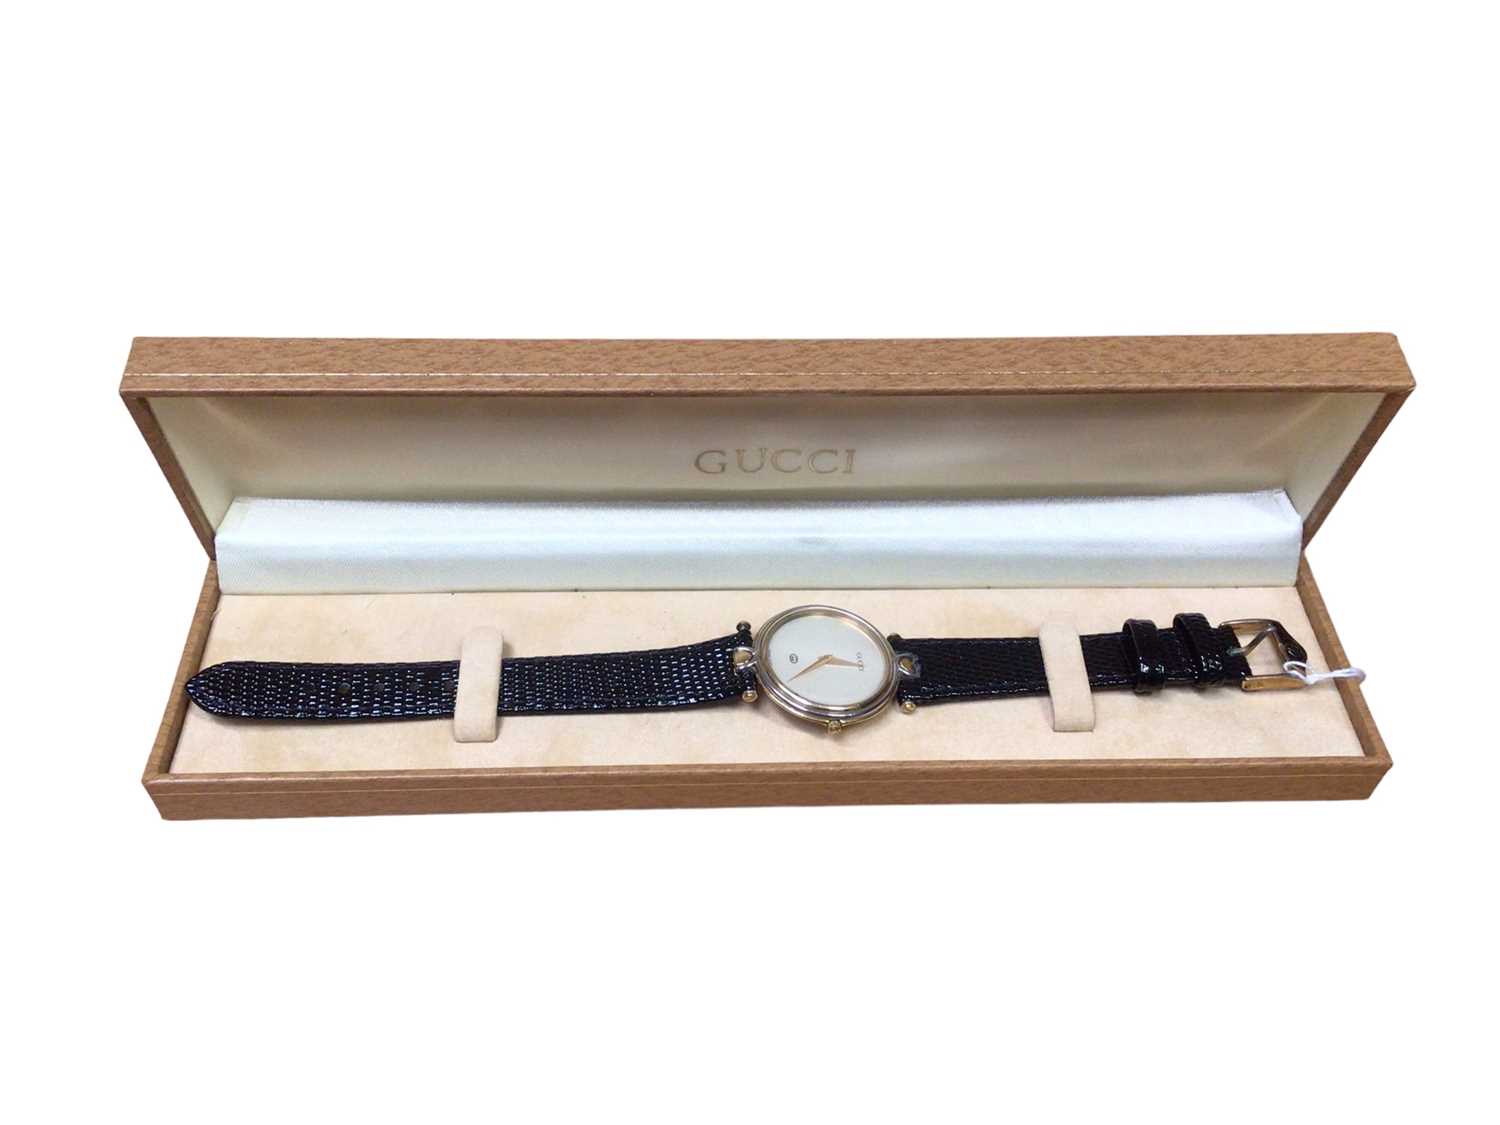 Lot 90 - Vintage Gucci wristwatch with original boxes and warranty card